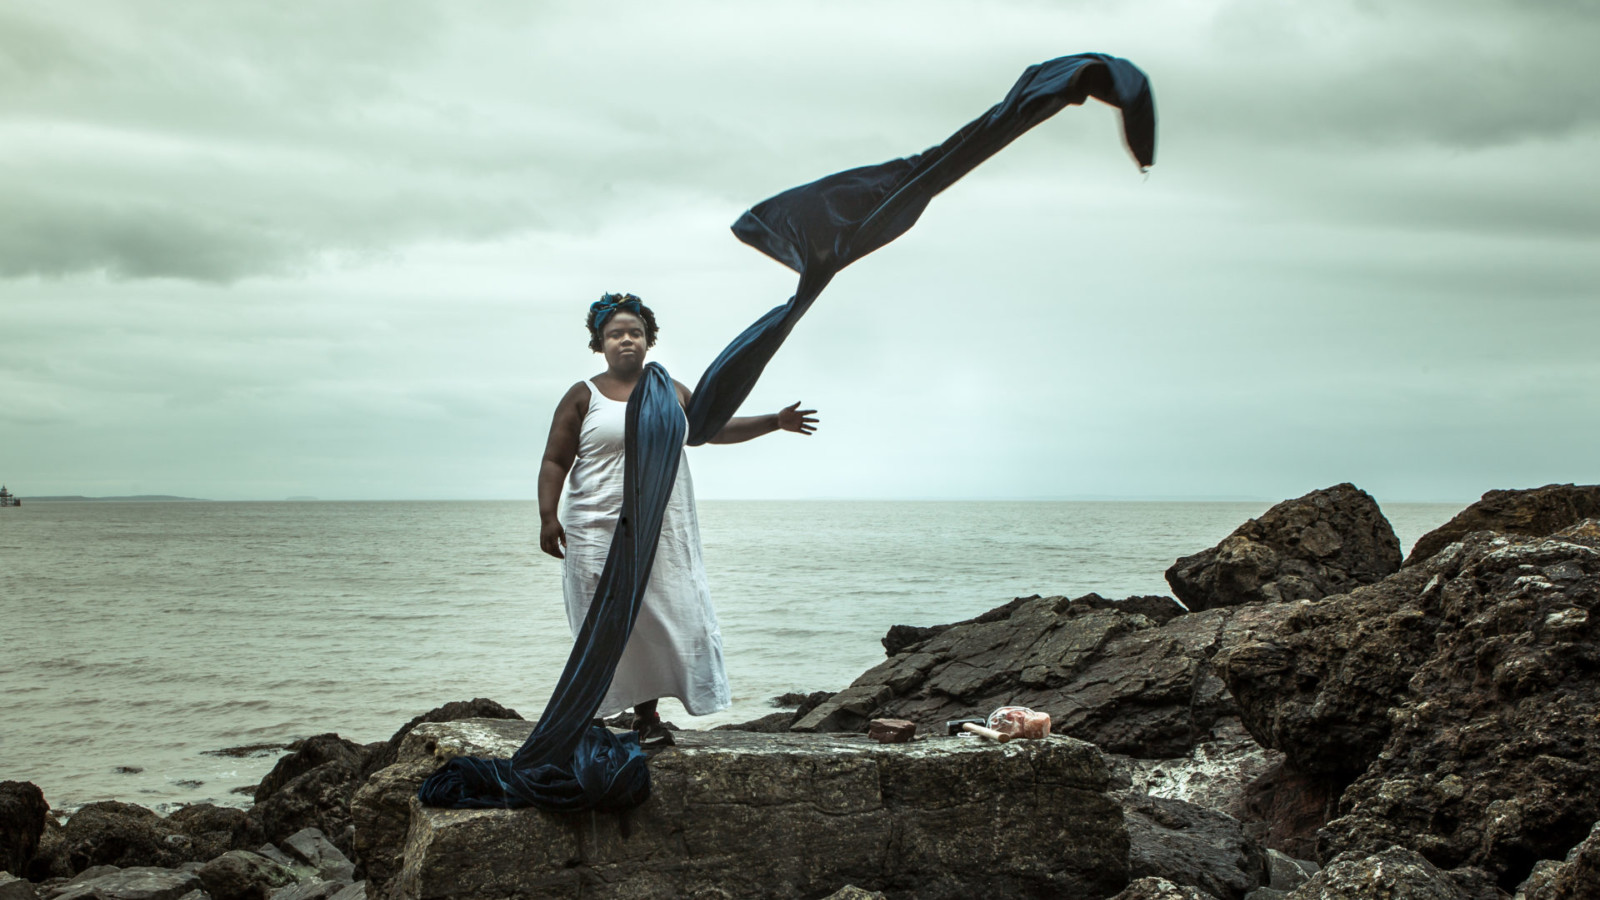 Artist Selina Thompson stands on rocky ground next to a grey sea and clouded sky. She is draped in a long piece of navy fabric which bellows and flies in the wind. Next to Selina on the ground is a mallet and a large chunk of pink salt.